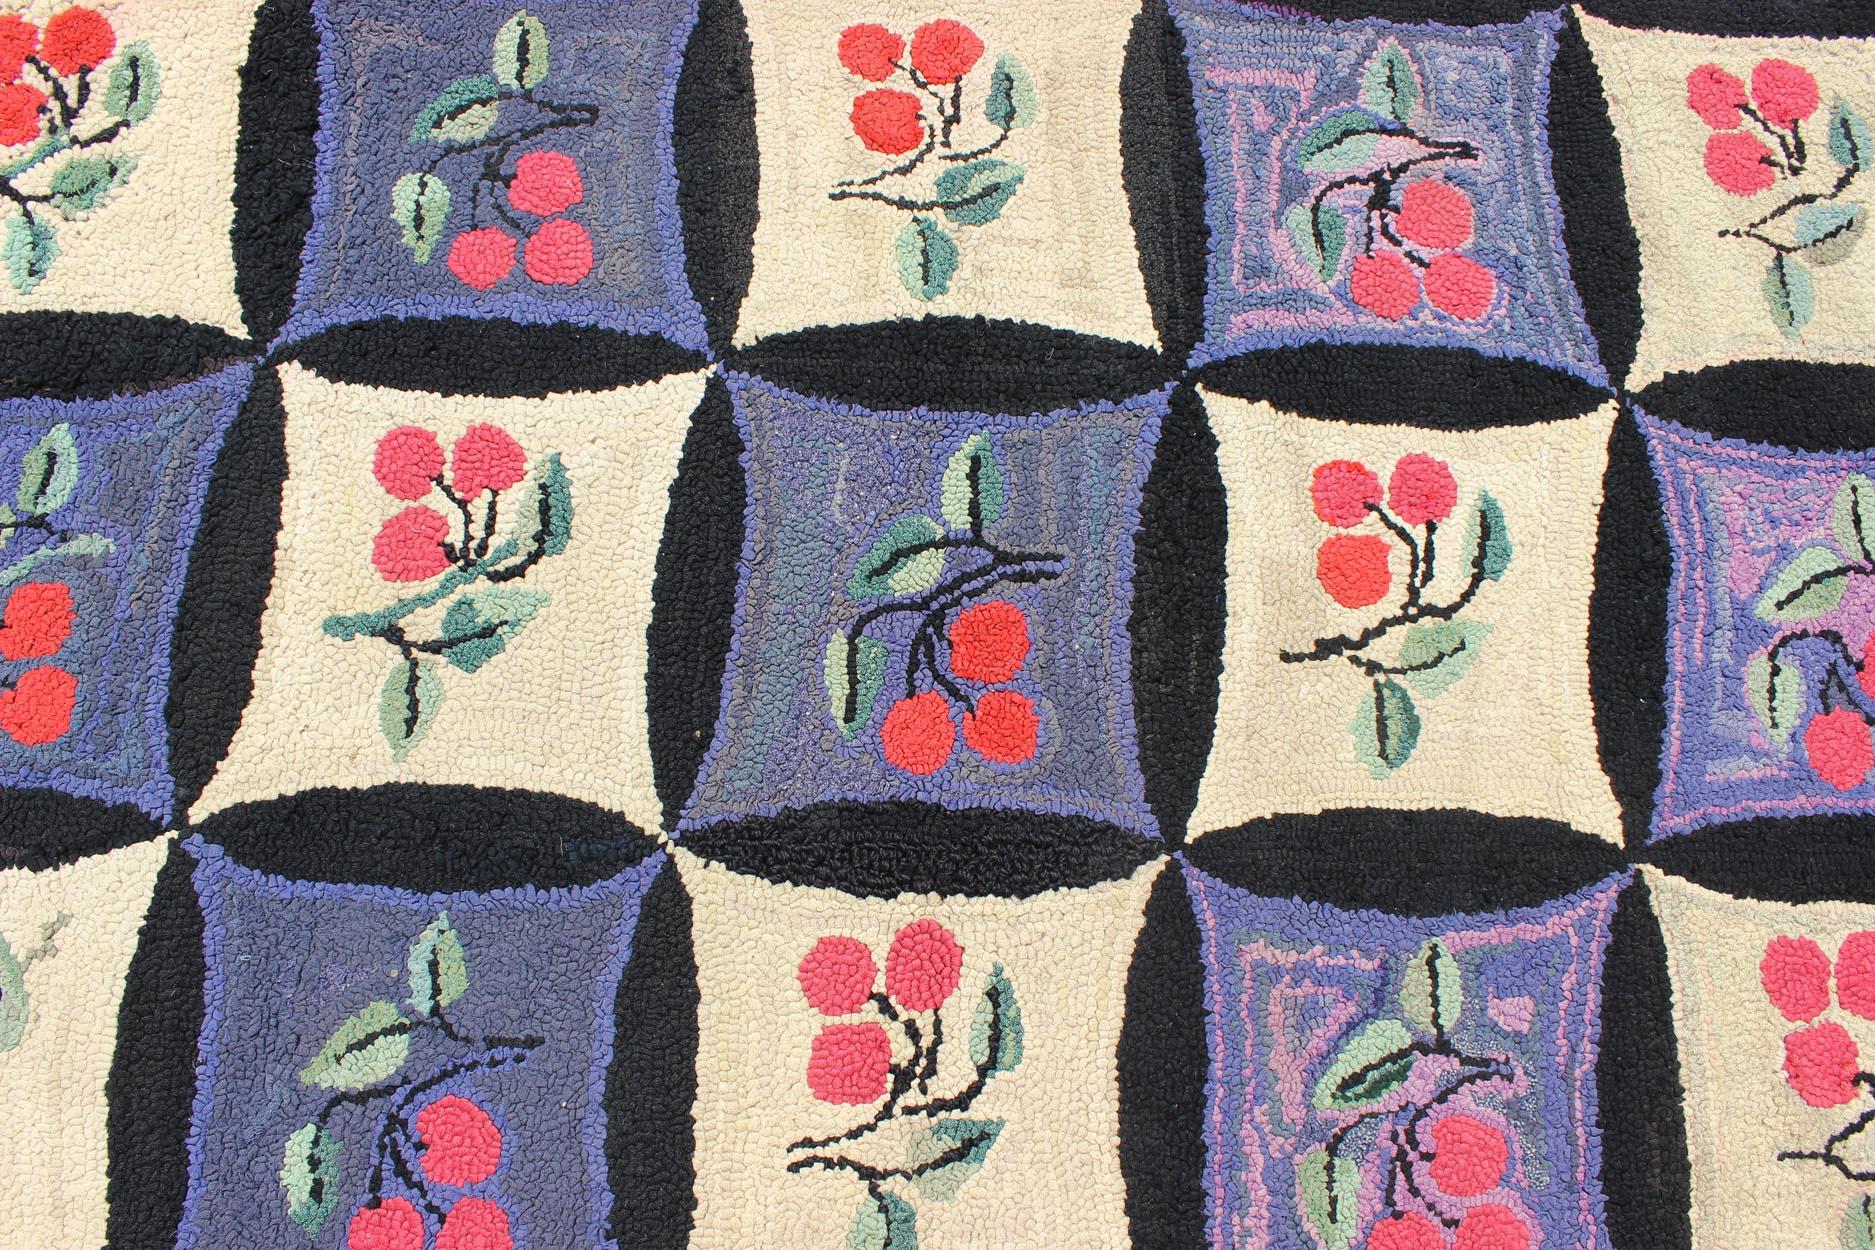 20th Century Antique American Hooked Rug with All-Over Circles & Floral Quilt Design For Sale